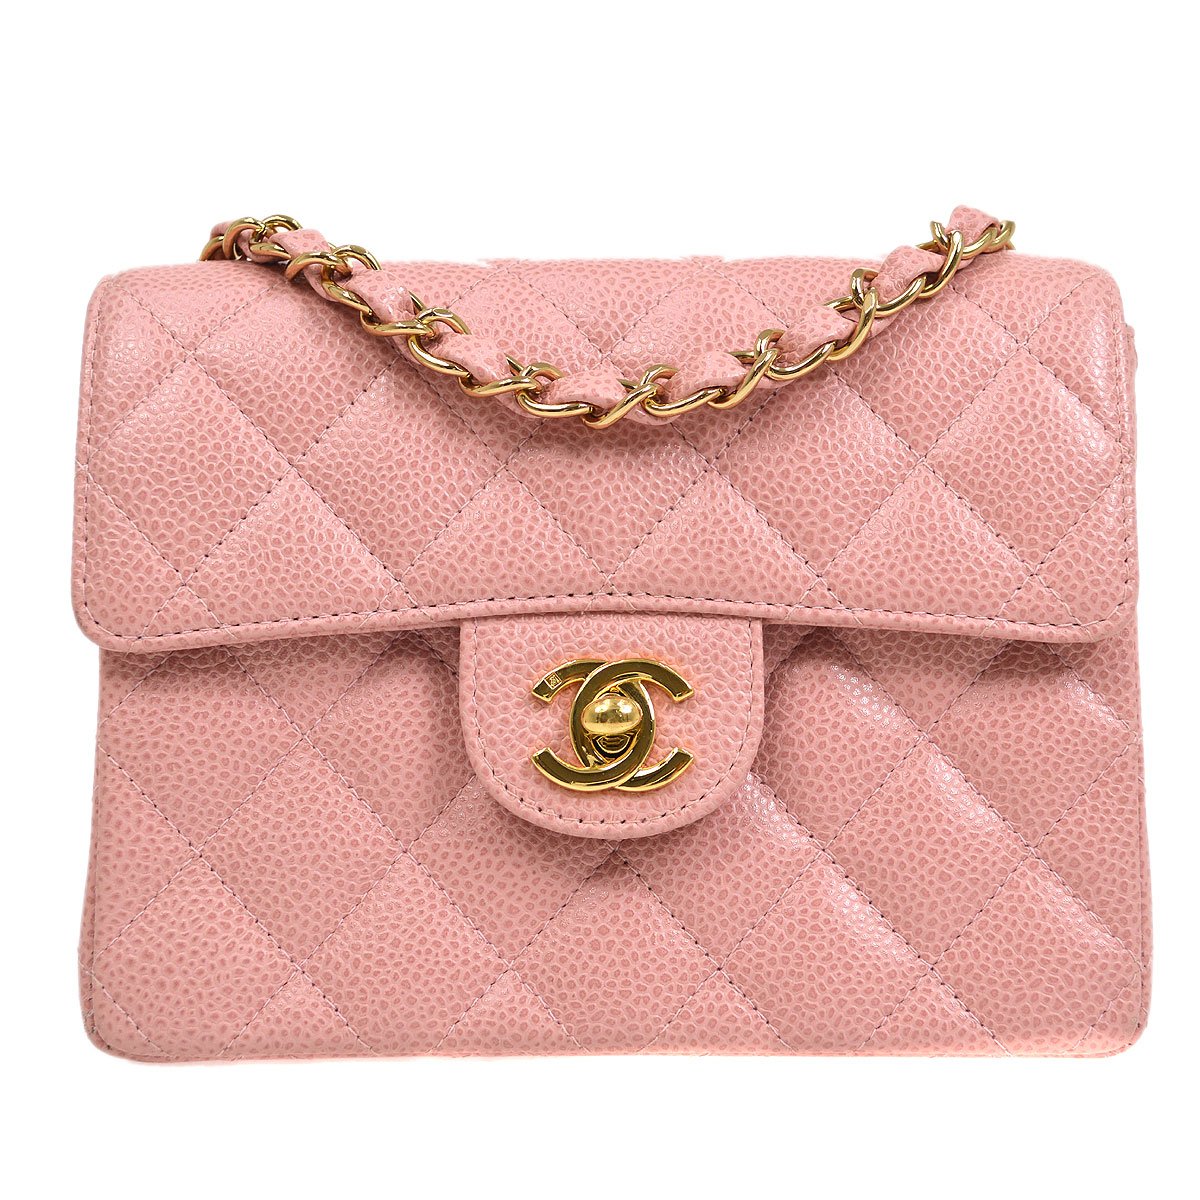 CHANEL 2003-2004 Classic Square Flap 17 Pink Caviar 82773